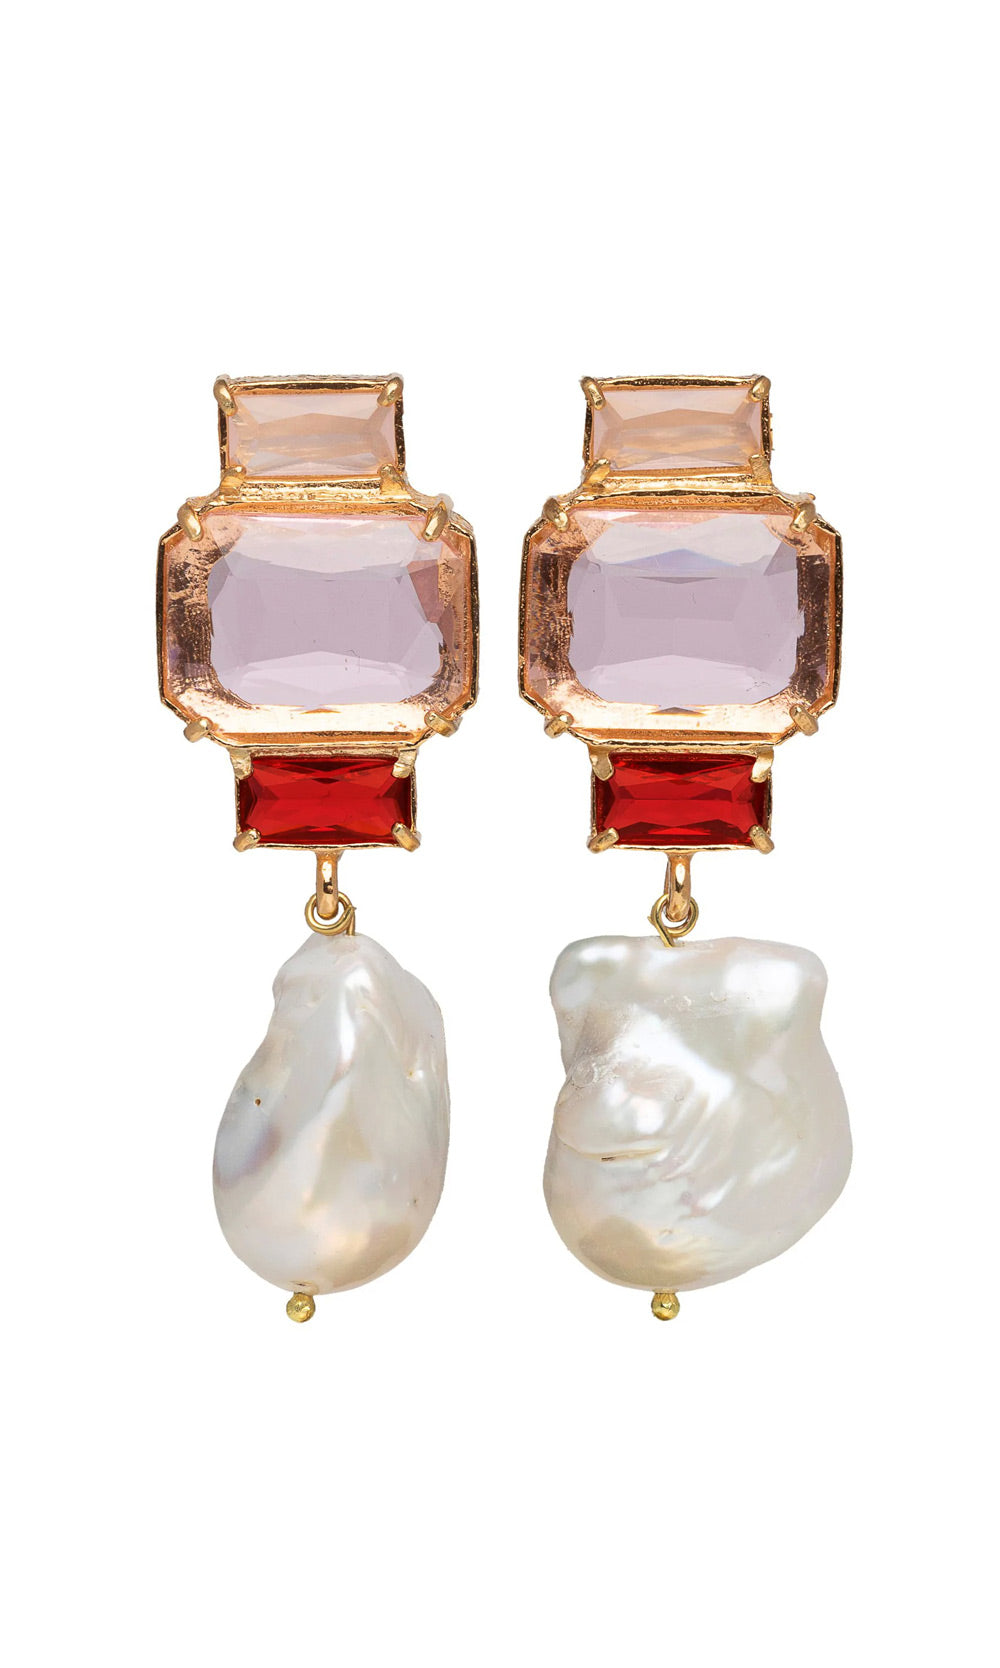 Christie Nicolaides Bambina Earrings Pink